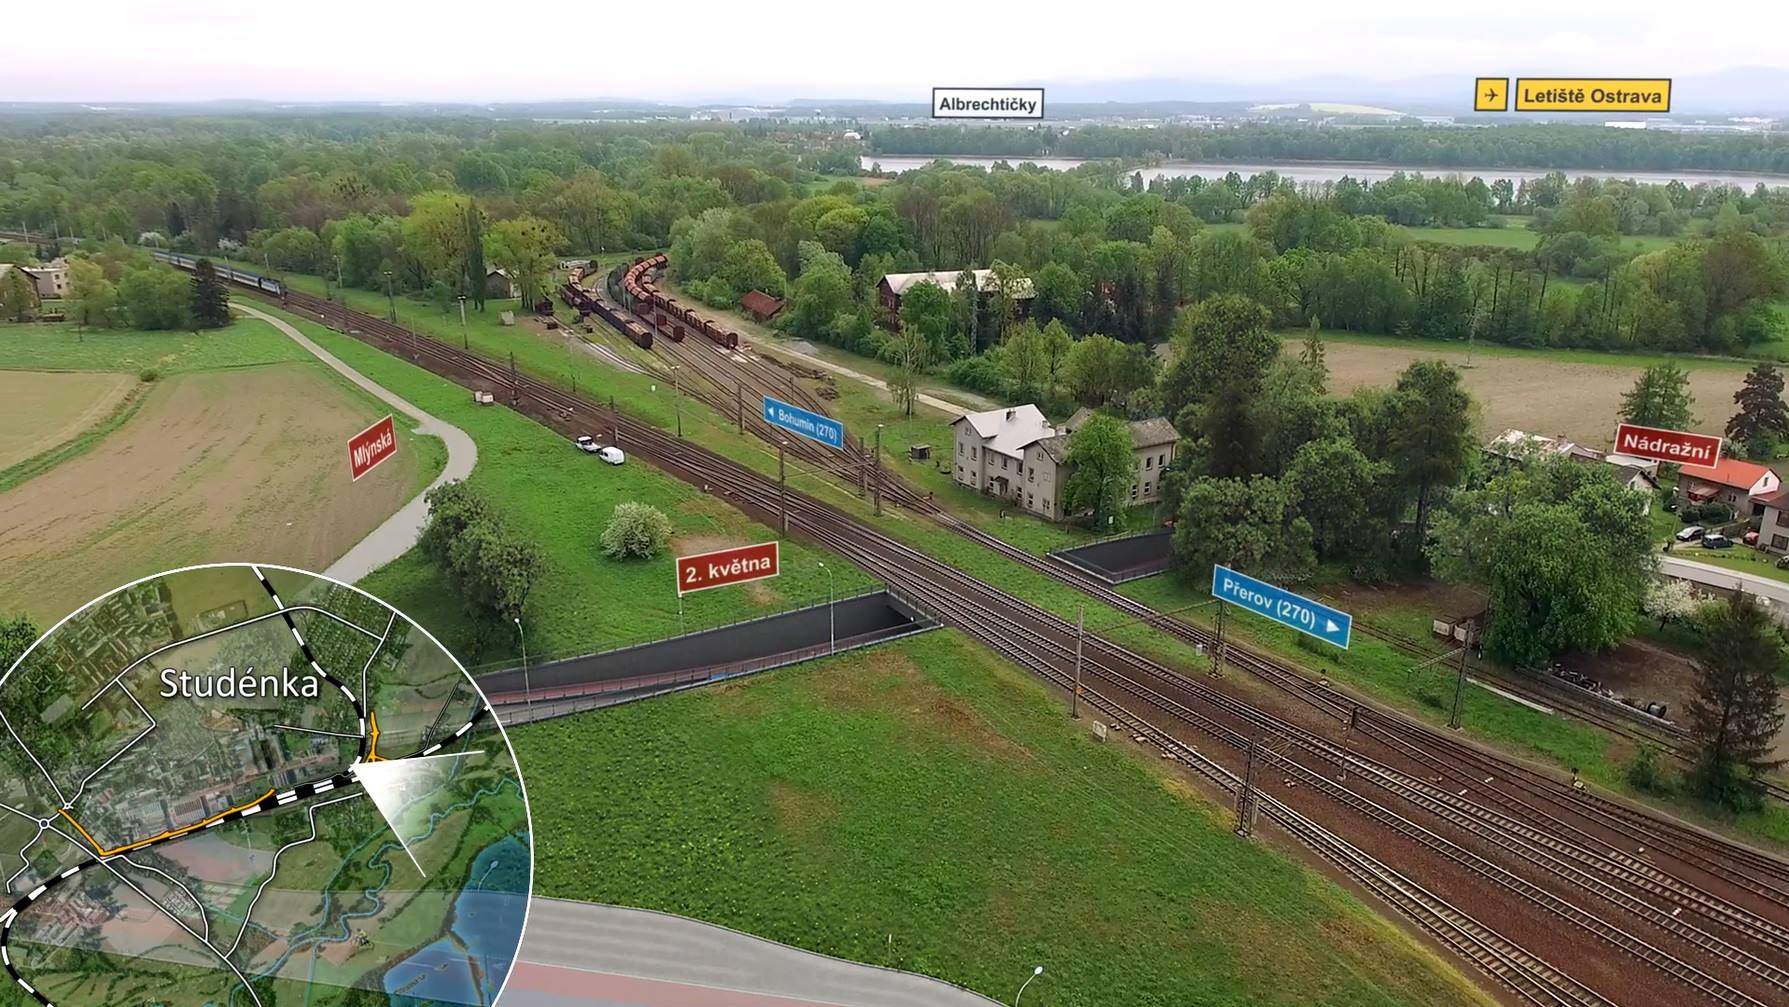 A multi-level crossing proposal was prepared for the Studénka railway crossing